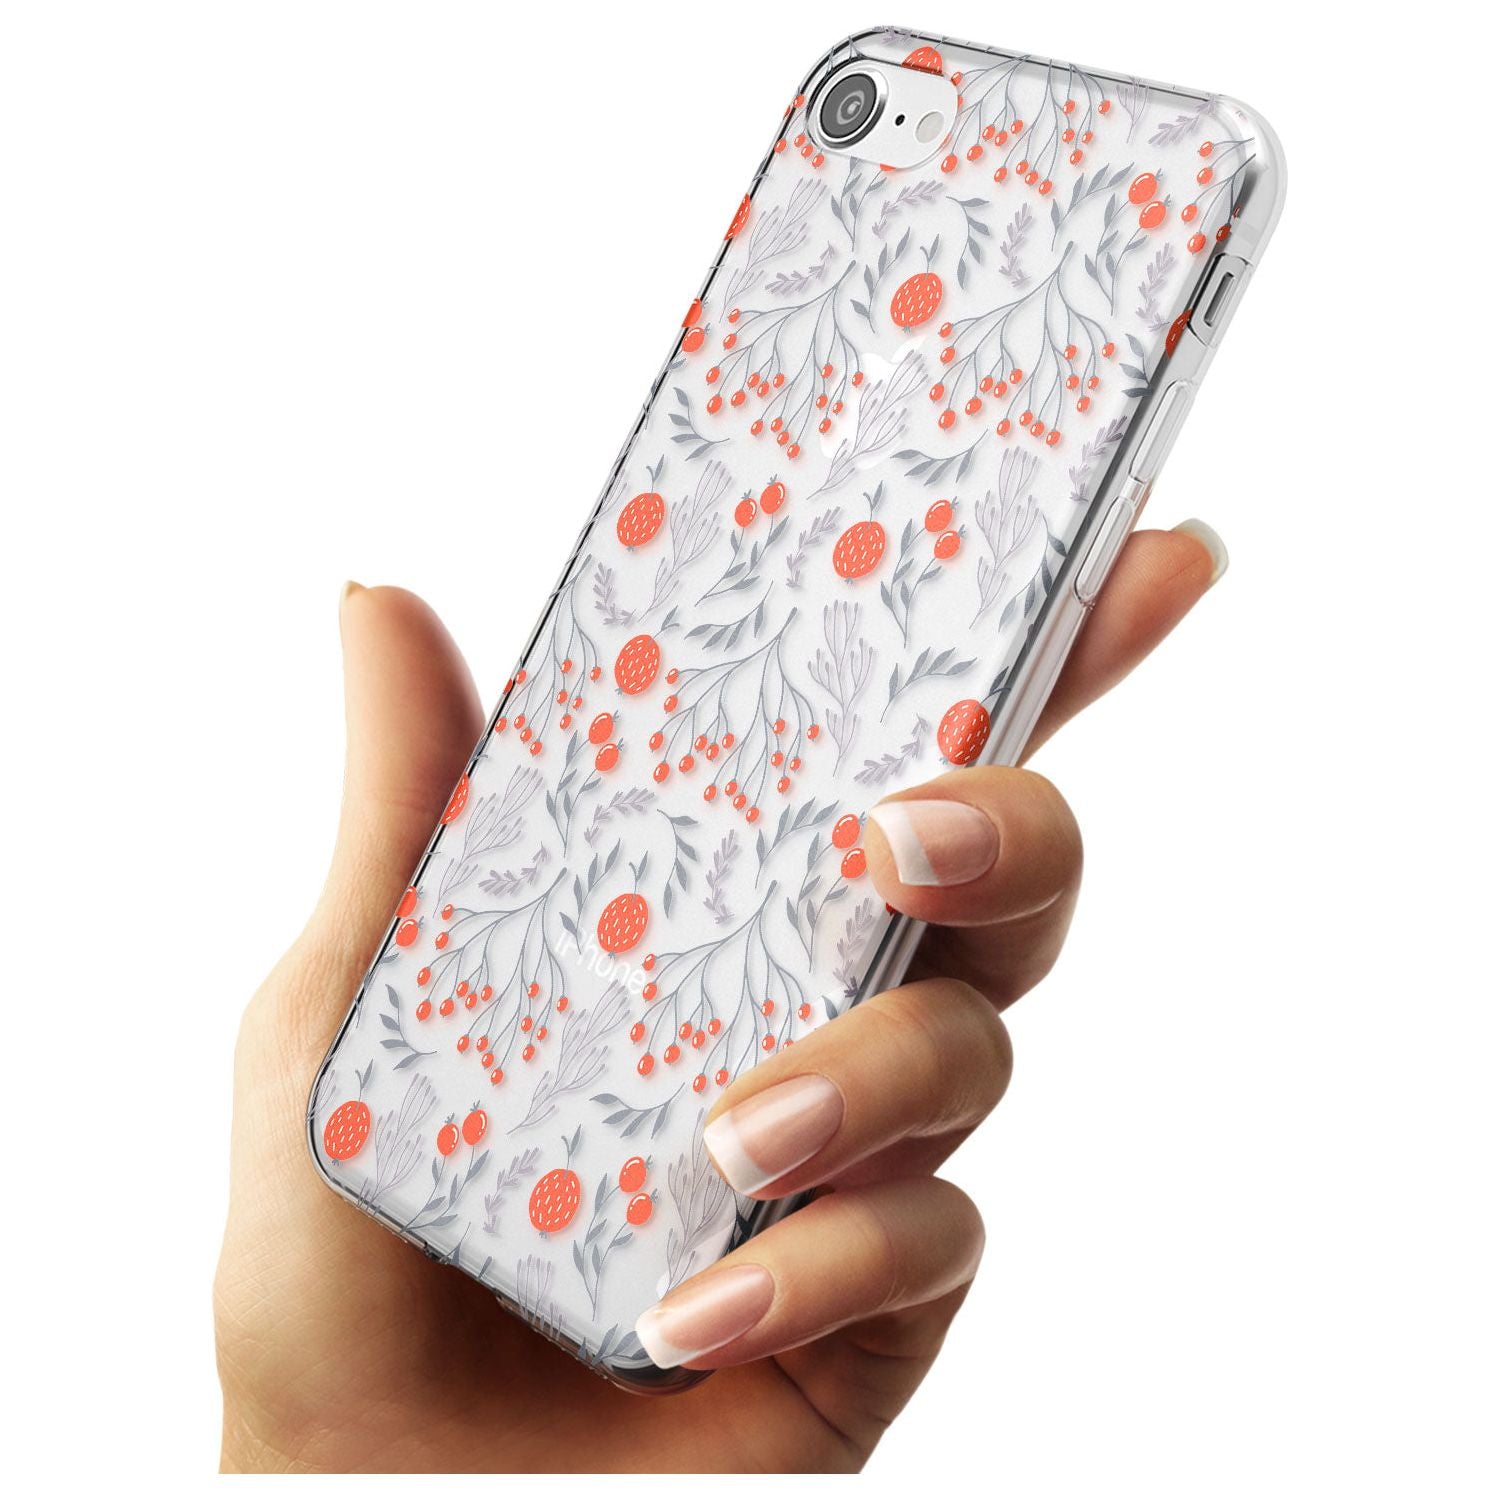 Red Fruits Transparent Floral Slim TPU Phone Case for iPhone SE 8 7 Plus